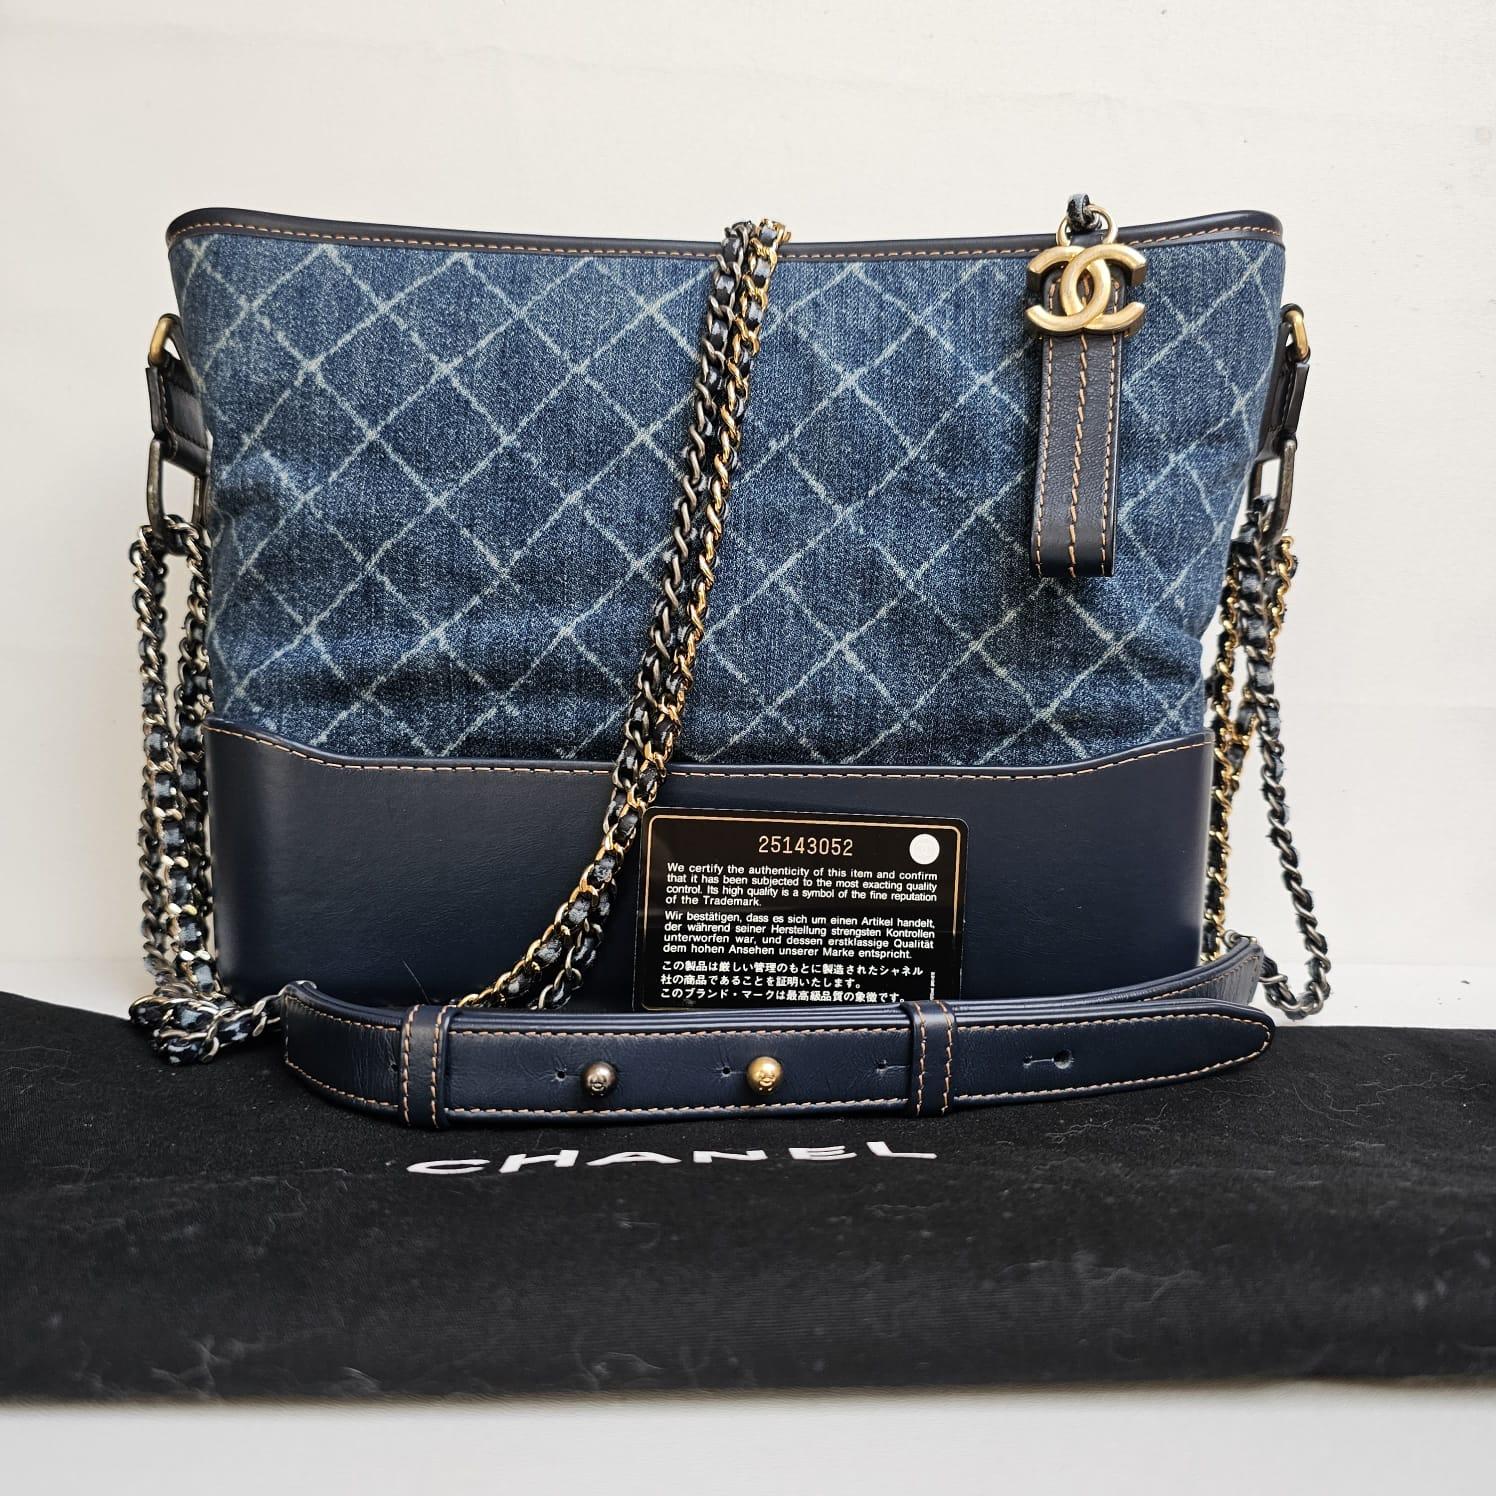 Chanel Medium Denim Quilted Gabrielle Hobo Bag For Sale 5